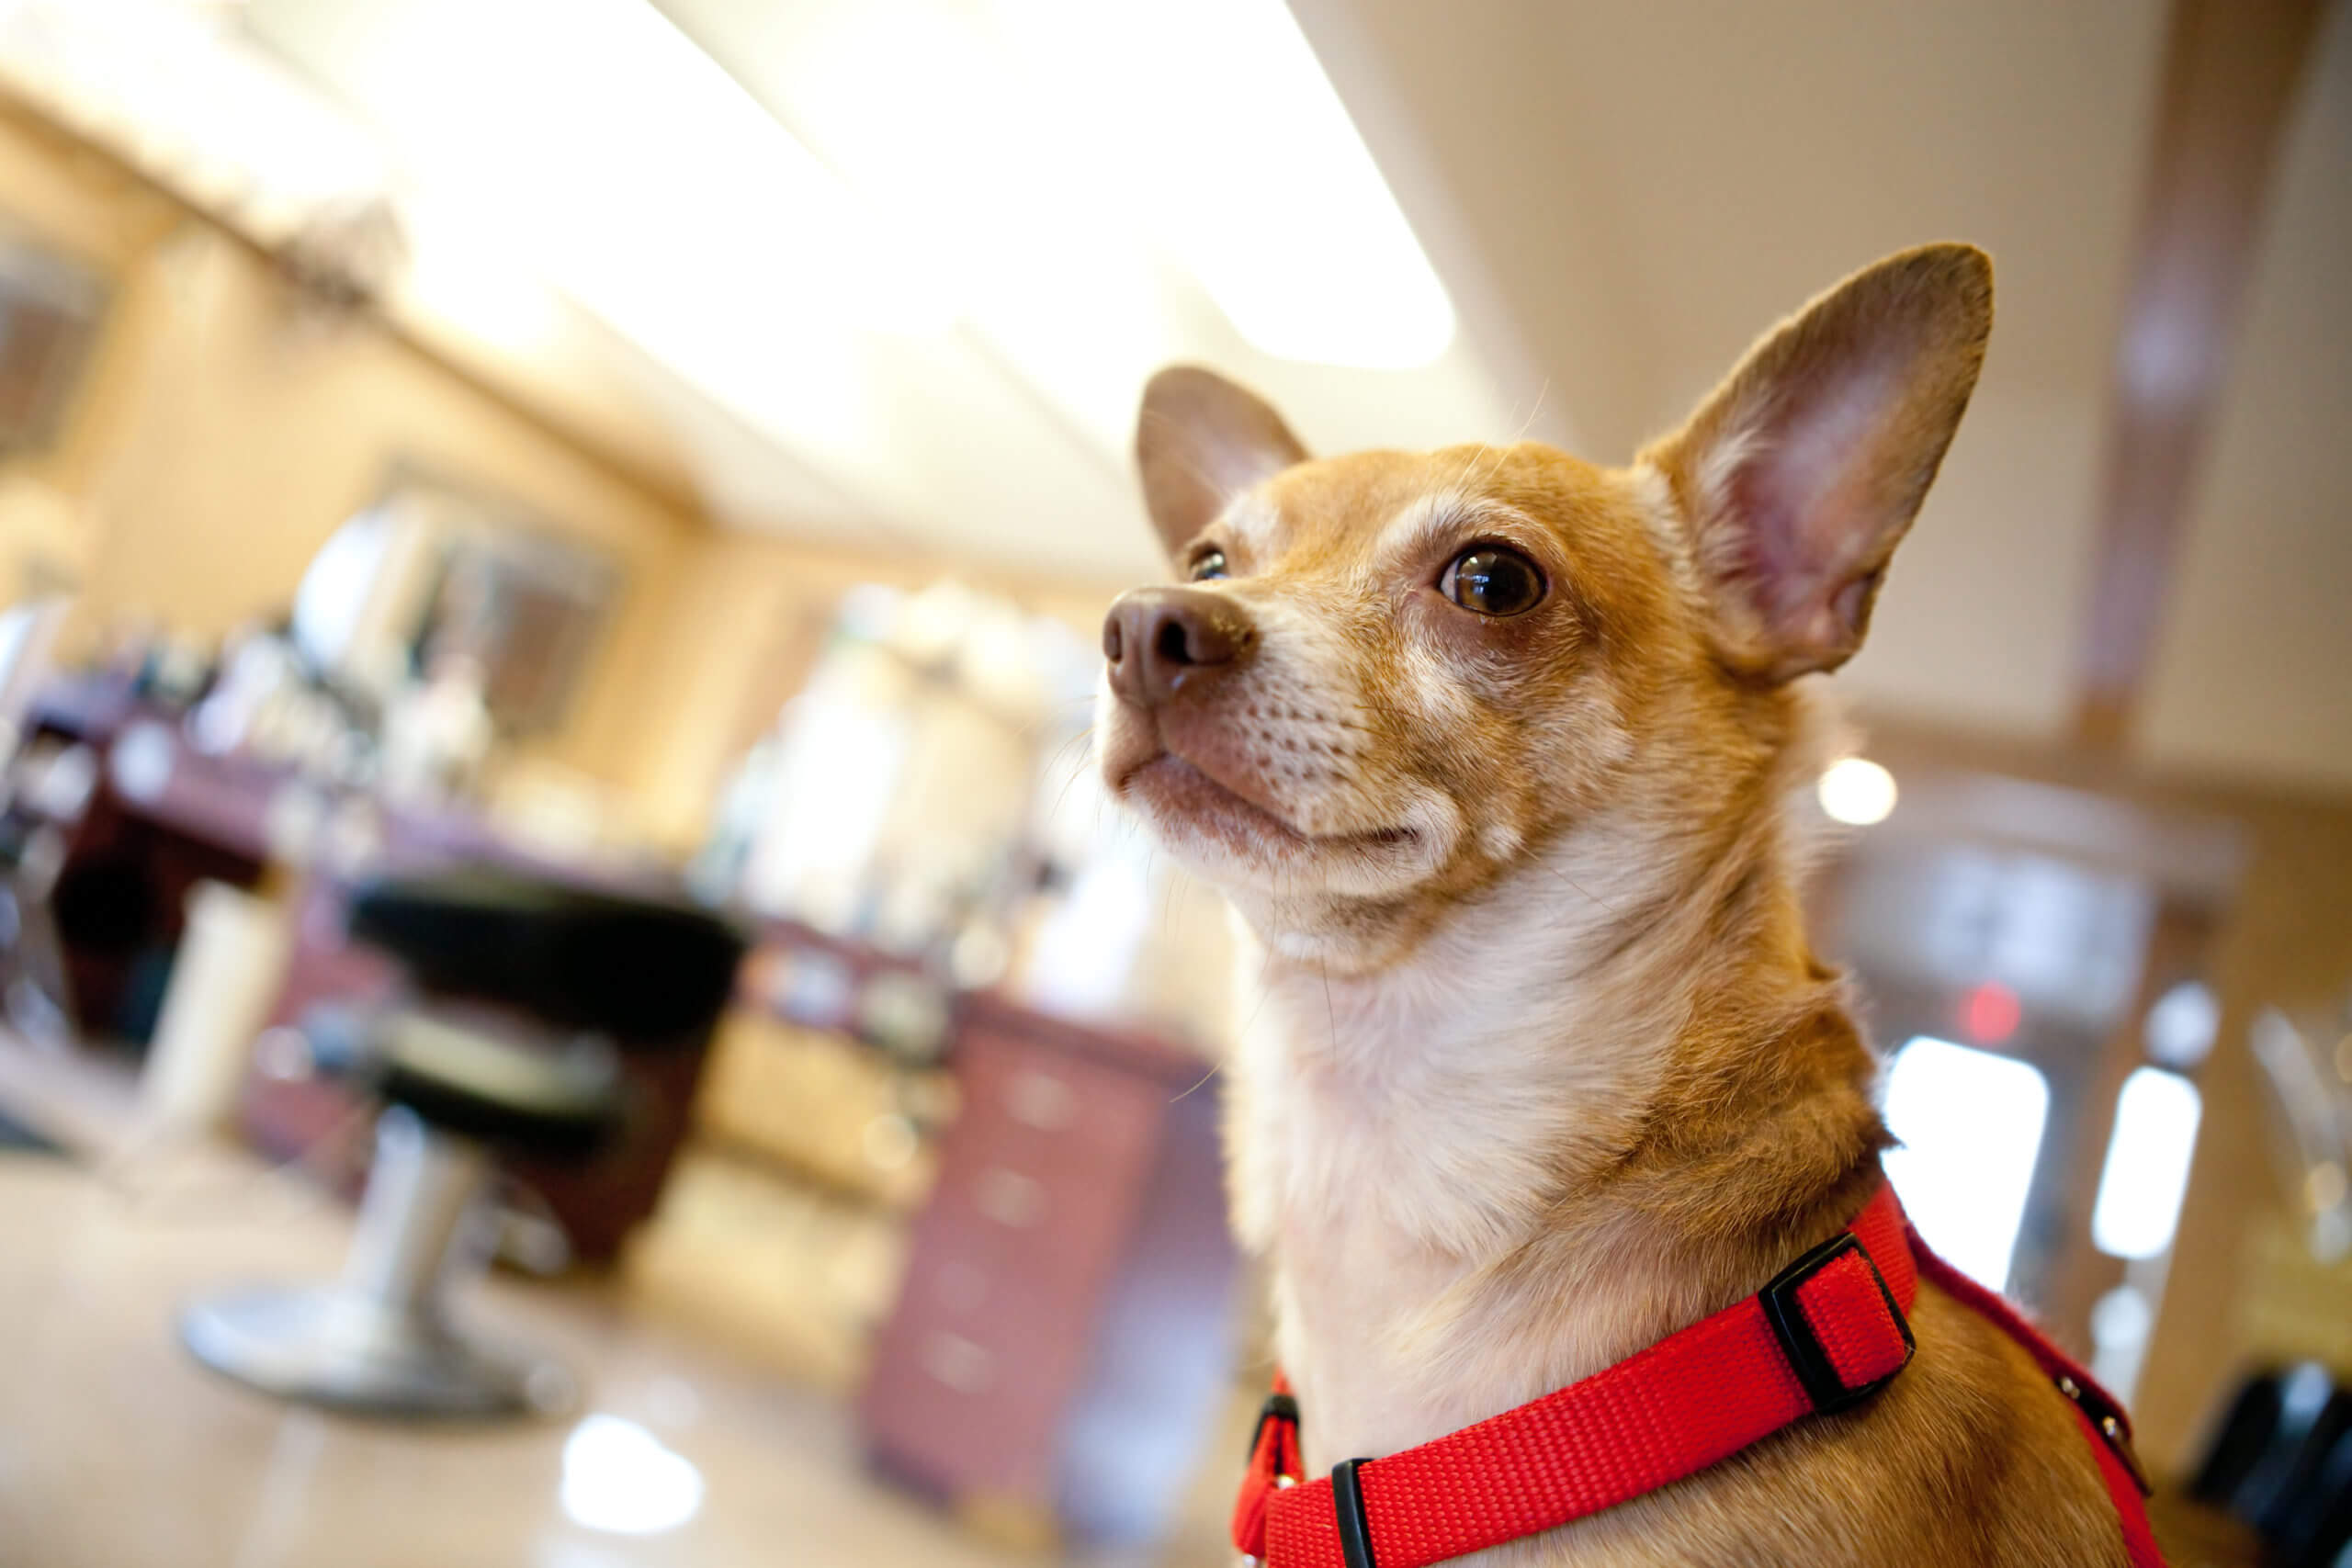 chihuahua-dog-seated-inside-a-beauty-salon-great-concept-for-dog-grooming-shallow-dept